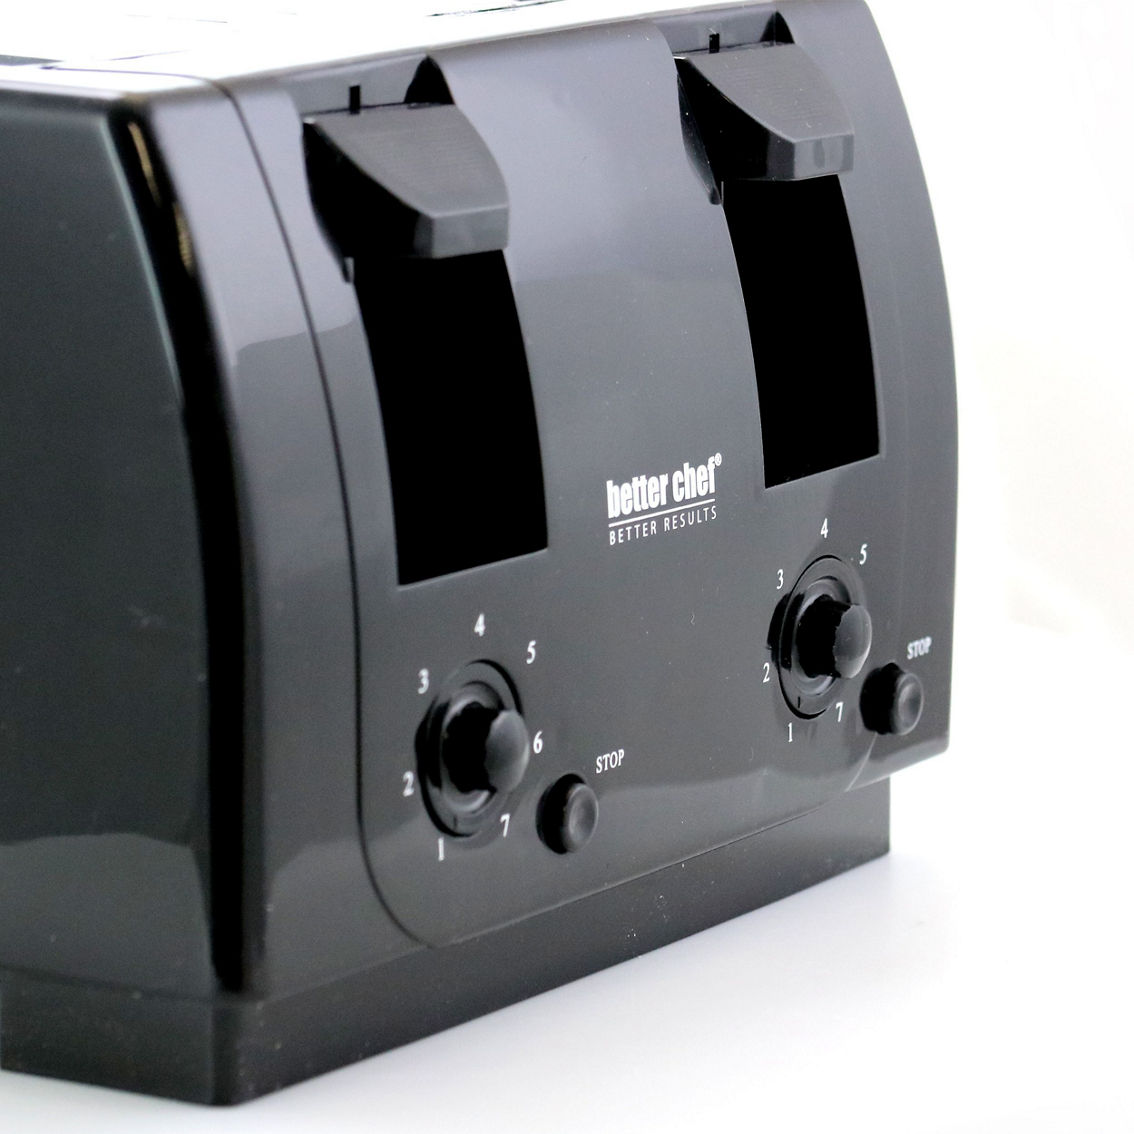 Better Chef 4 Slice Dual Control Toaster in Black - Image 3 of 5